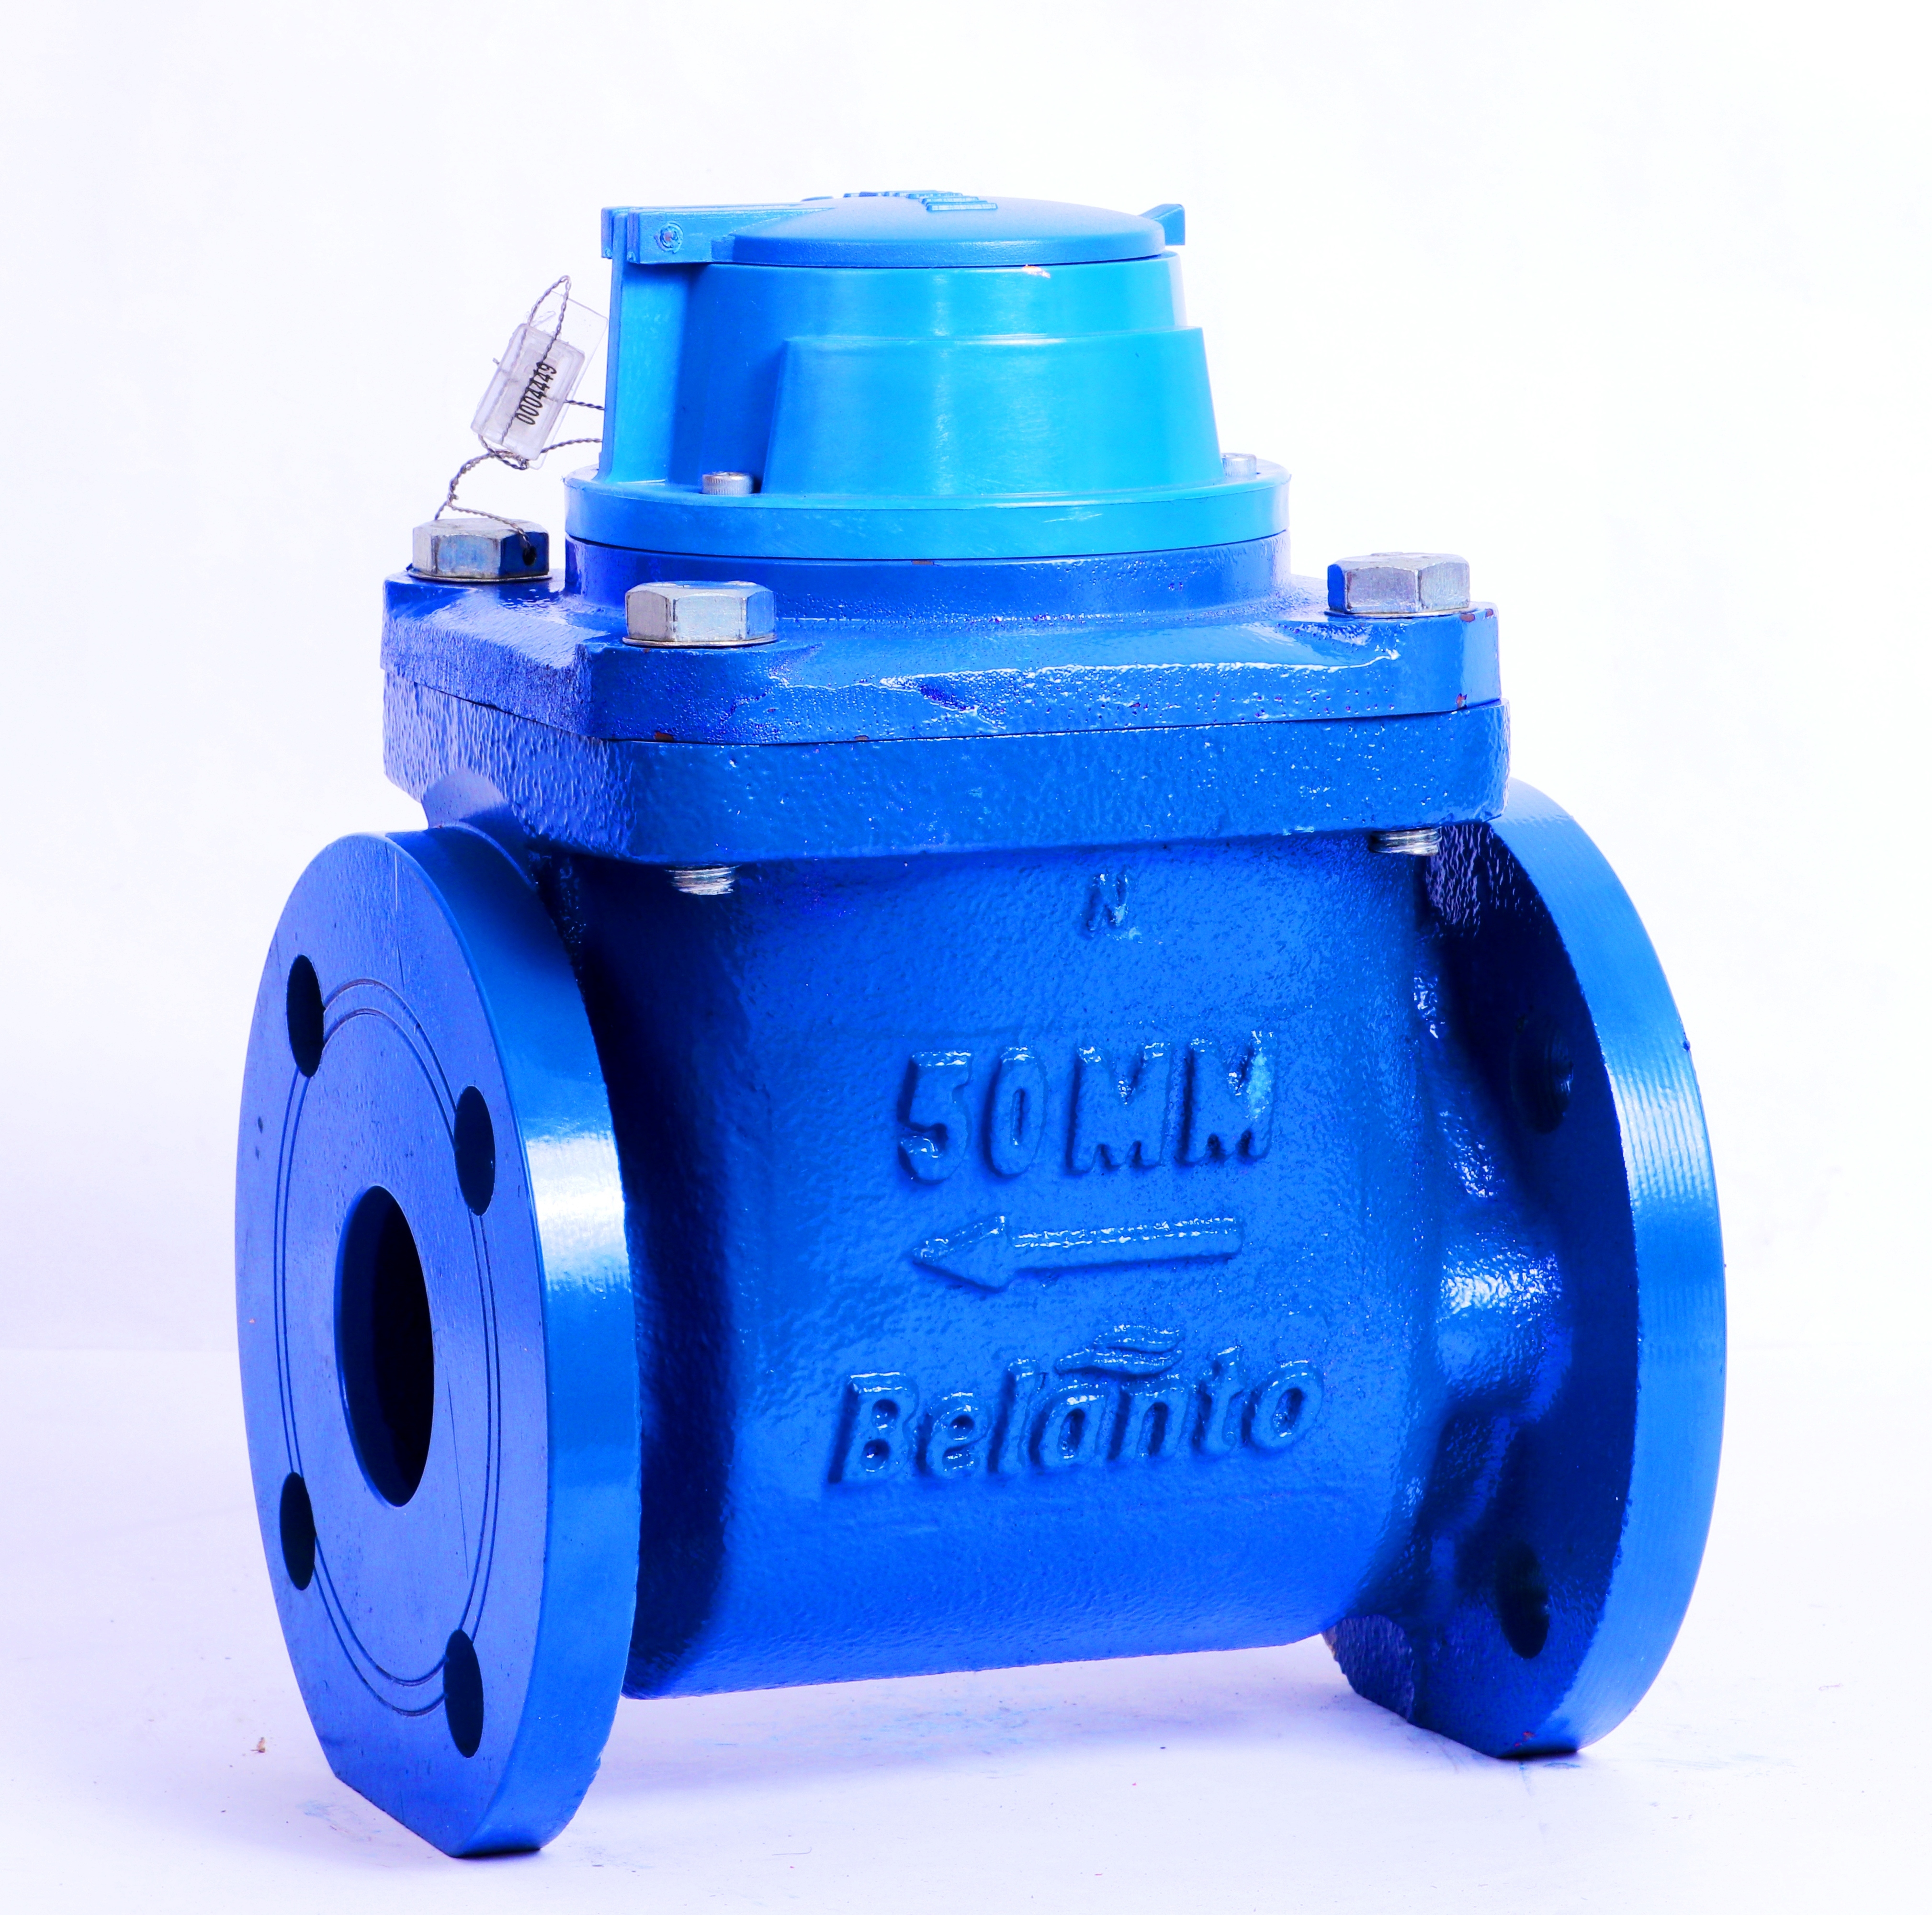 Woltman Type Class B (Iso 4064) Flange End Water Meter